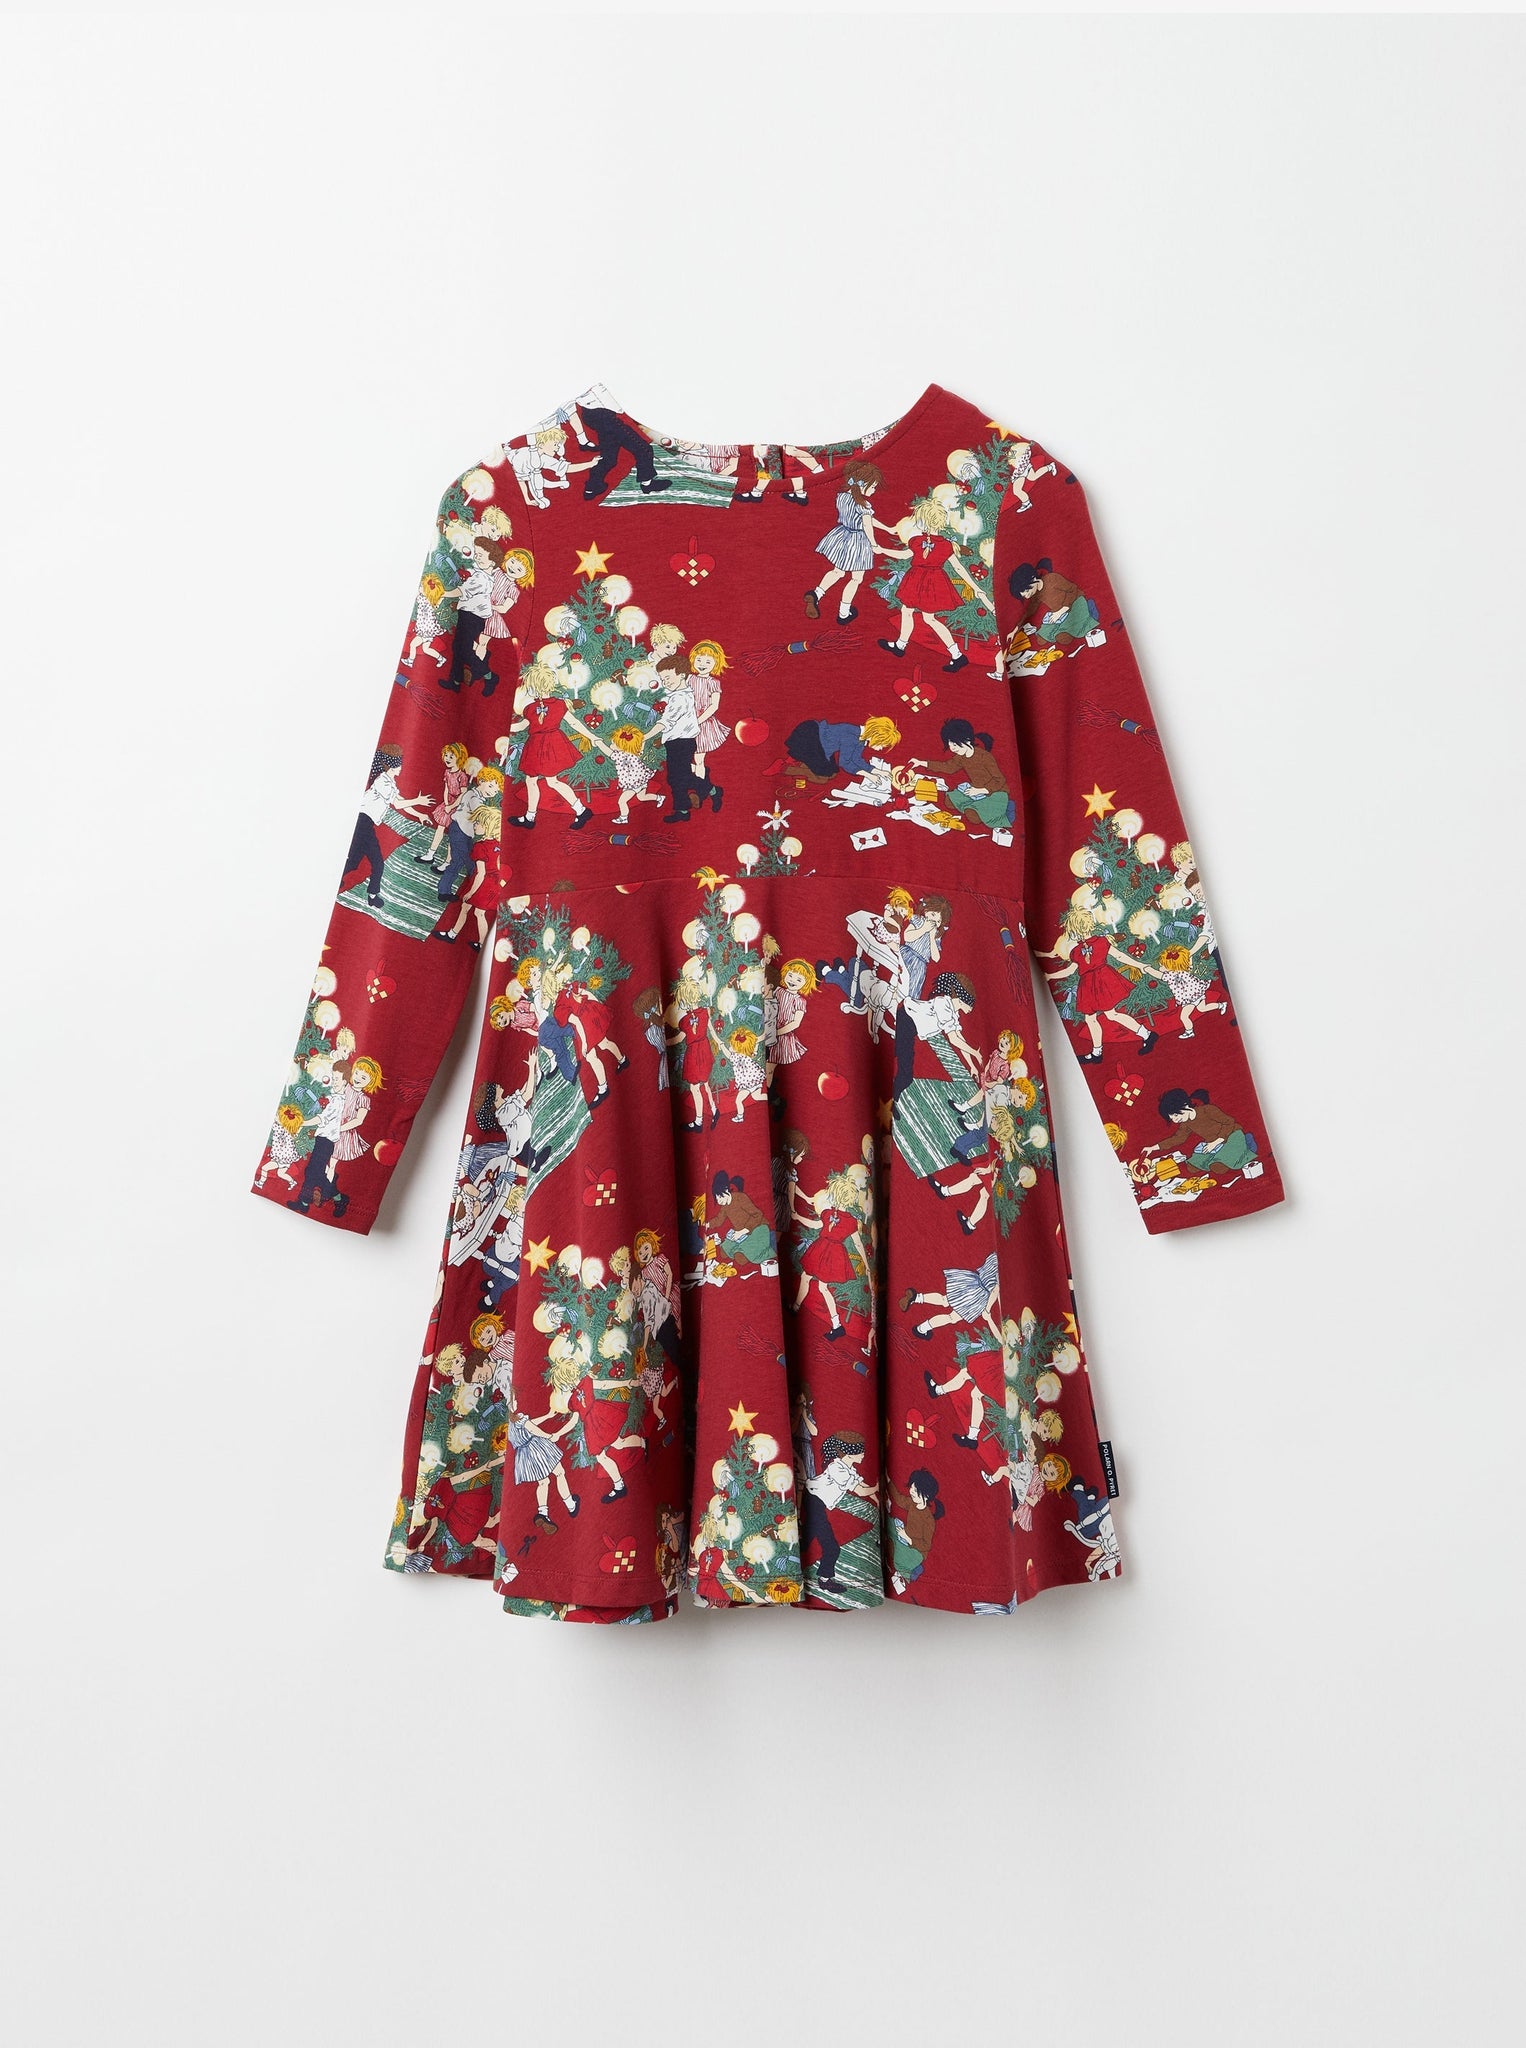 Red Girls Festive Twirl Dress from the Polarn O. Pyret kidswear collection. Nordic kids clothes made from sustainable sources.